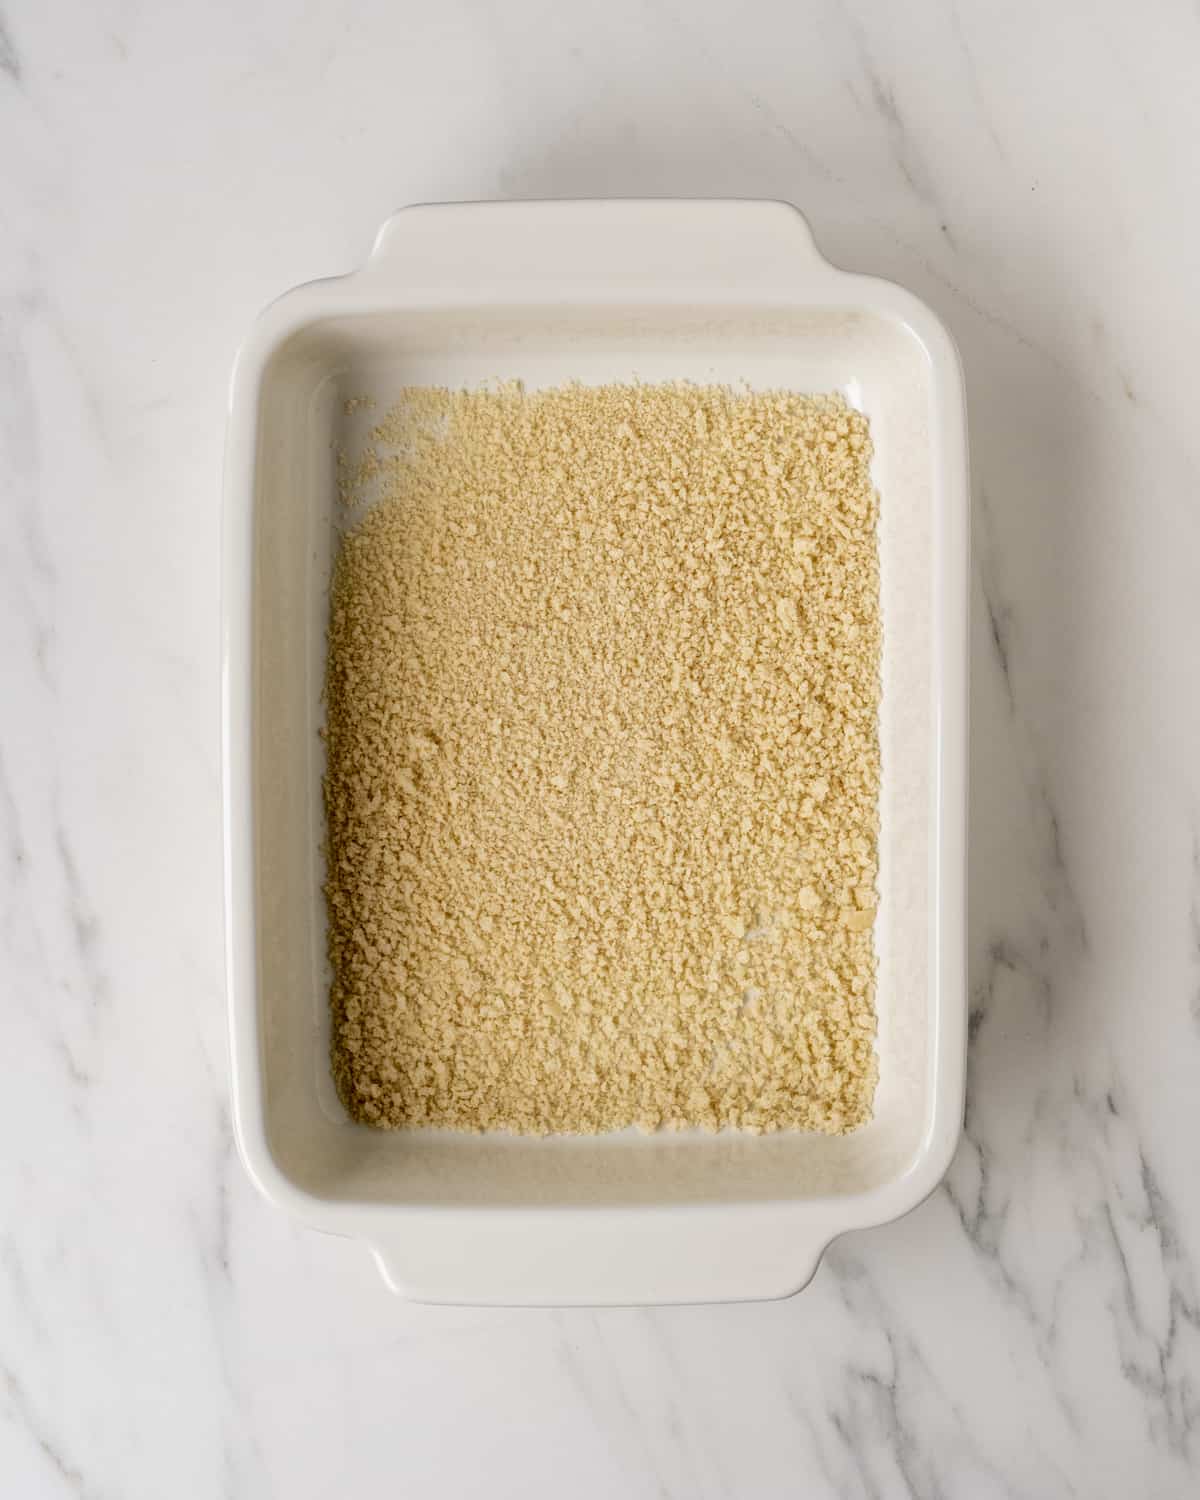 White ceramic baking dish lined with panko breadcrumbs